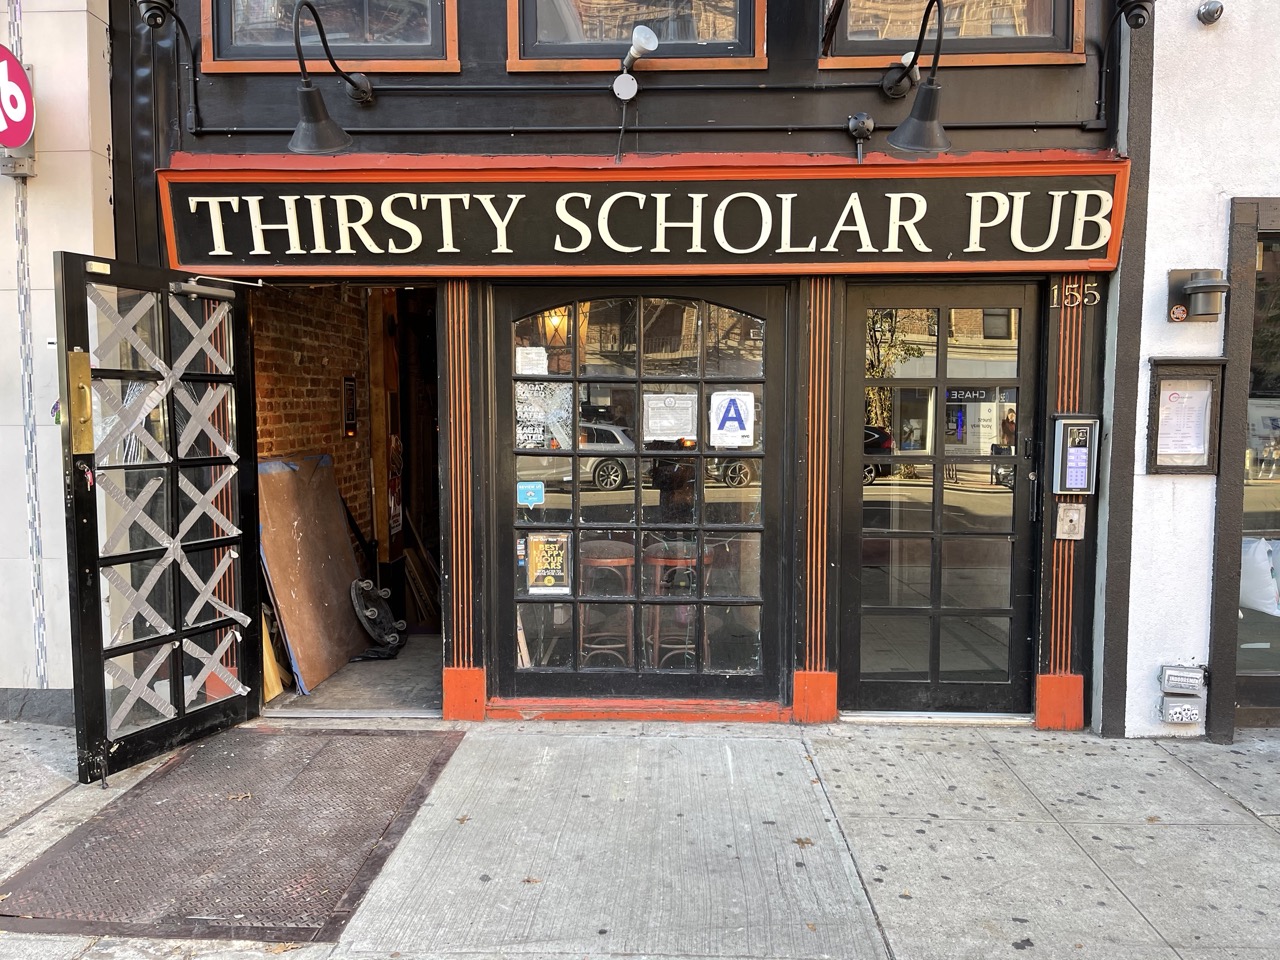 Image of the Thirsty Scholar Pub in NYC